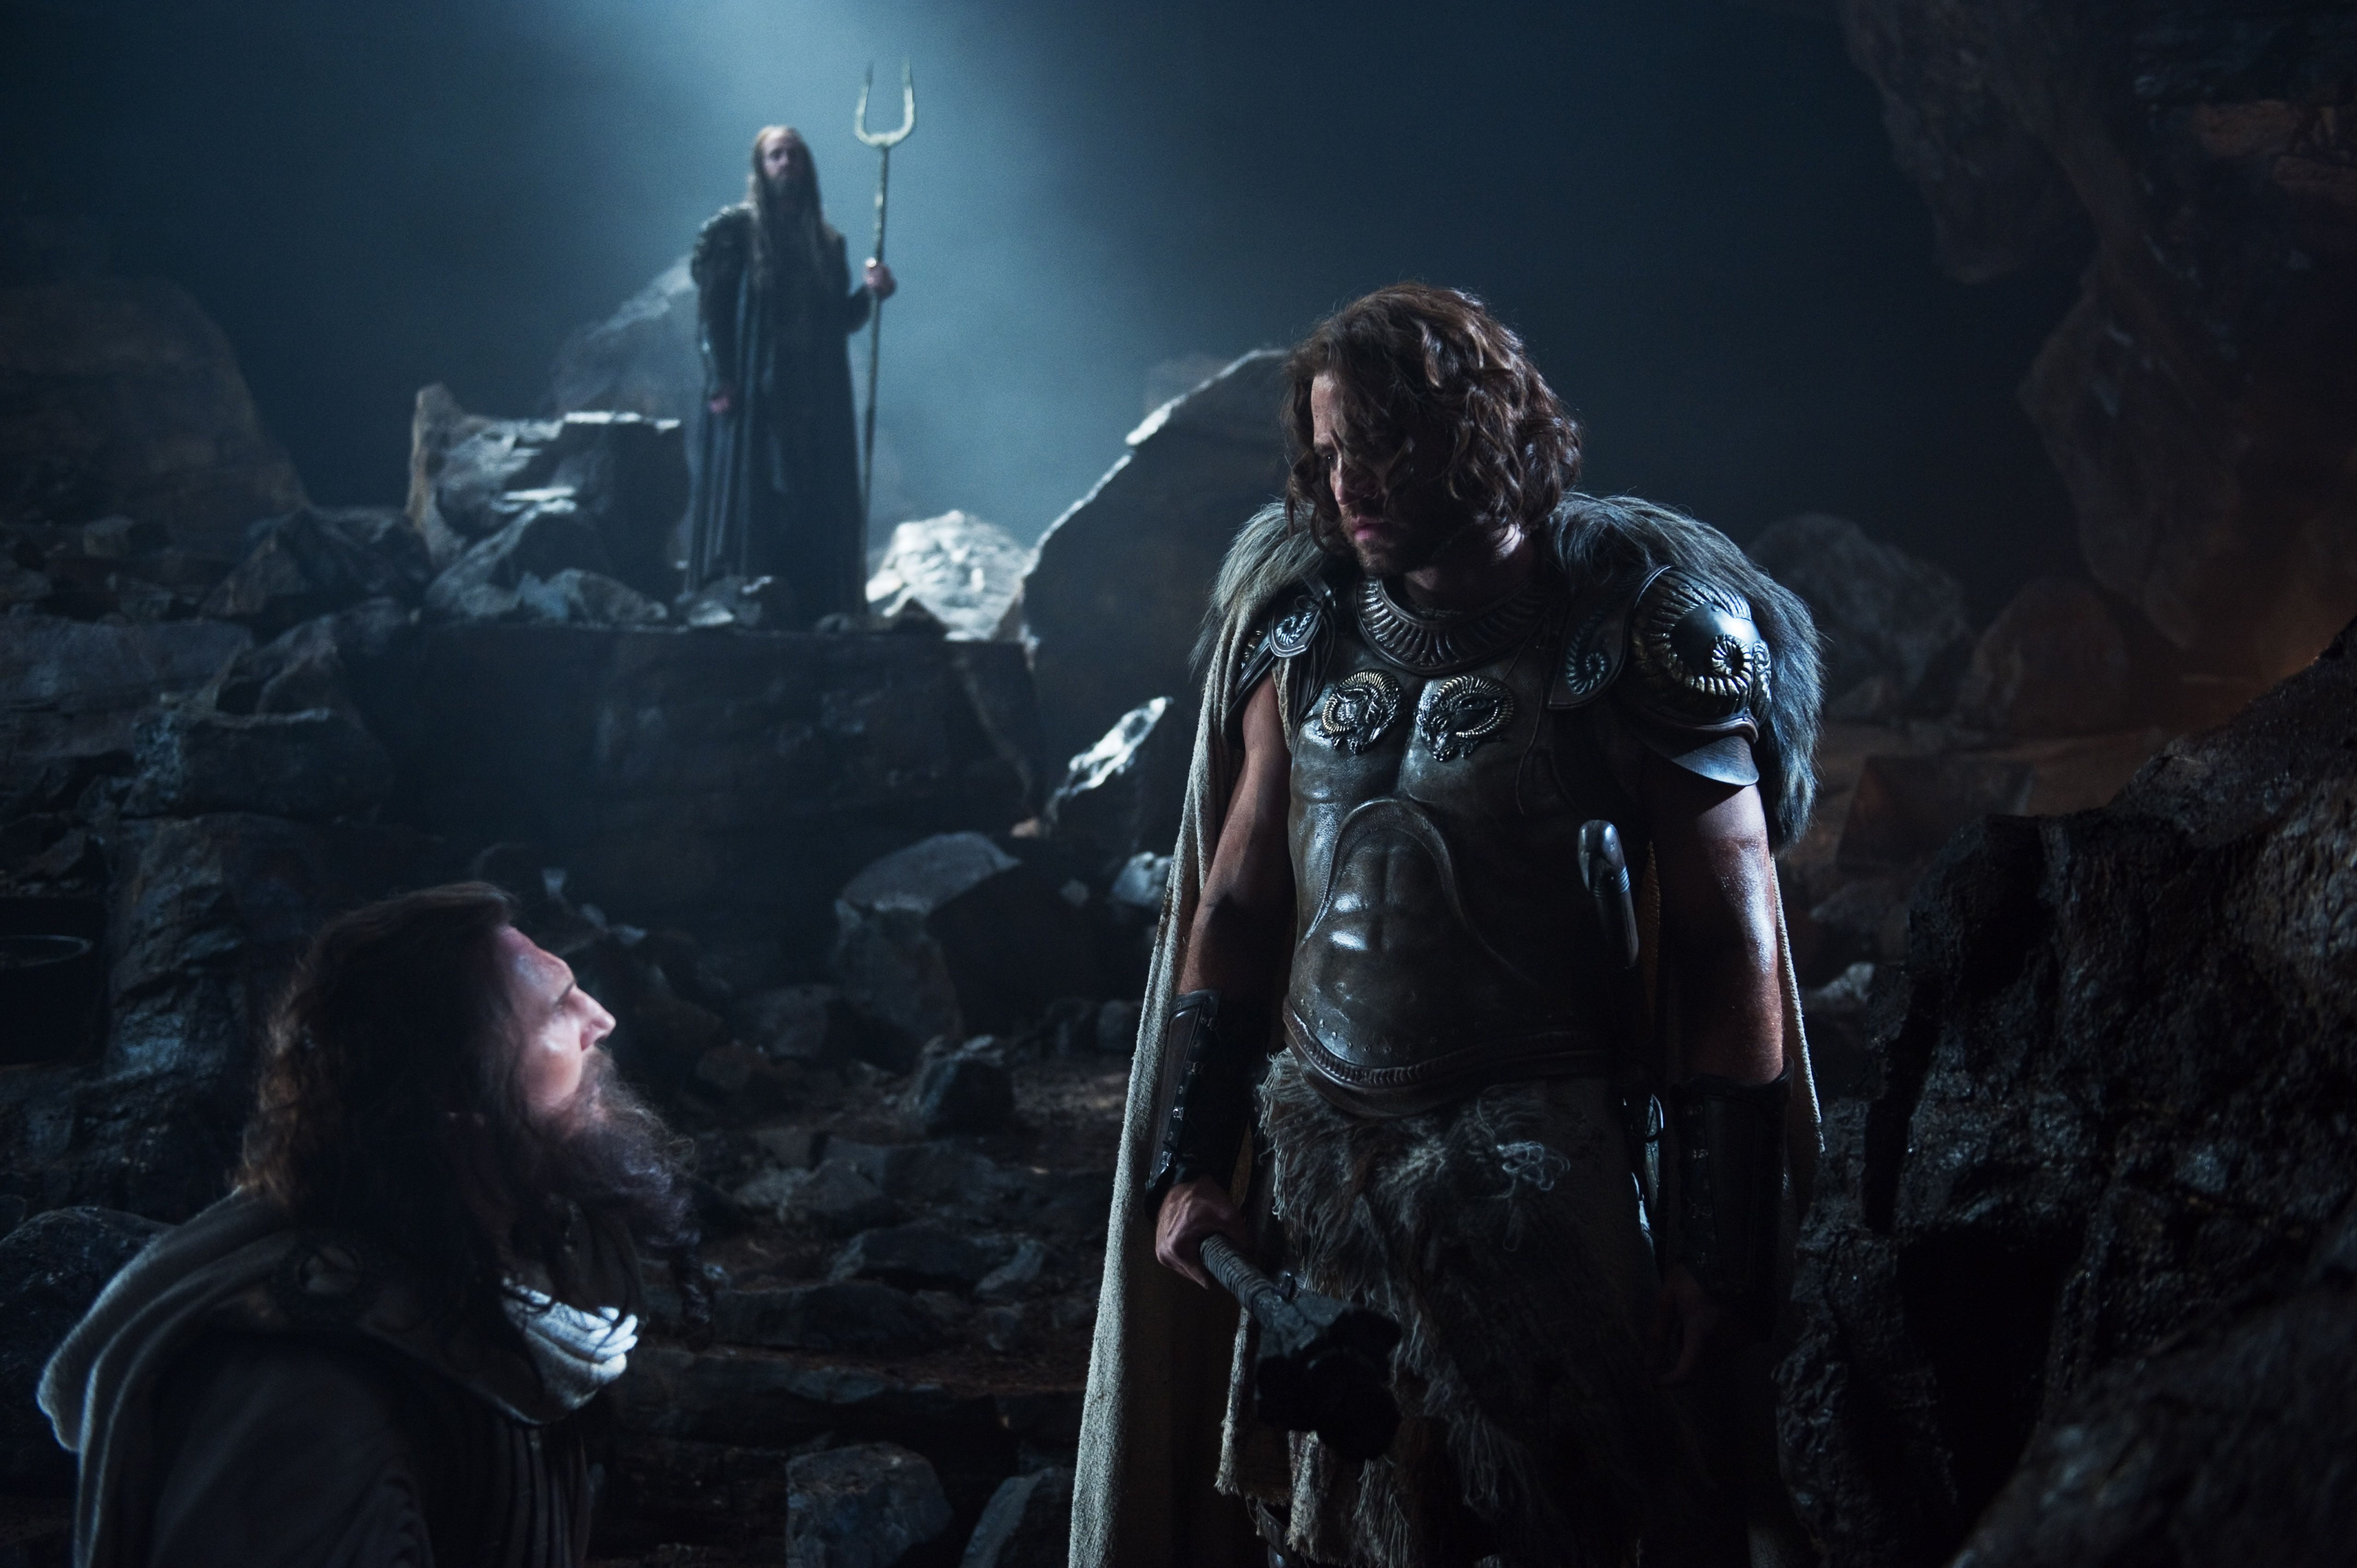 WRATH OF THE TITANS Image starring Liam Neeson